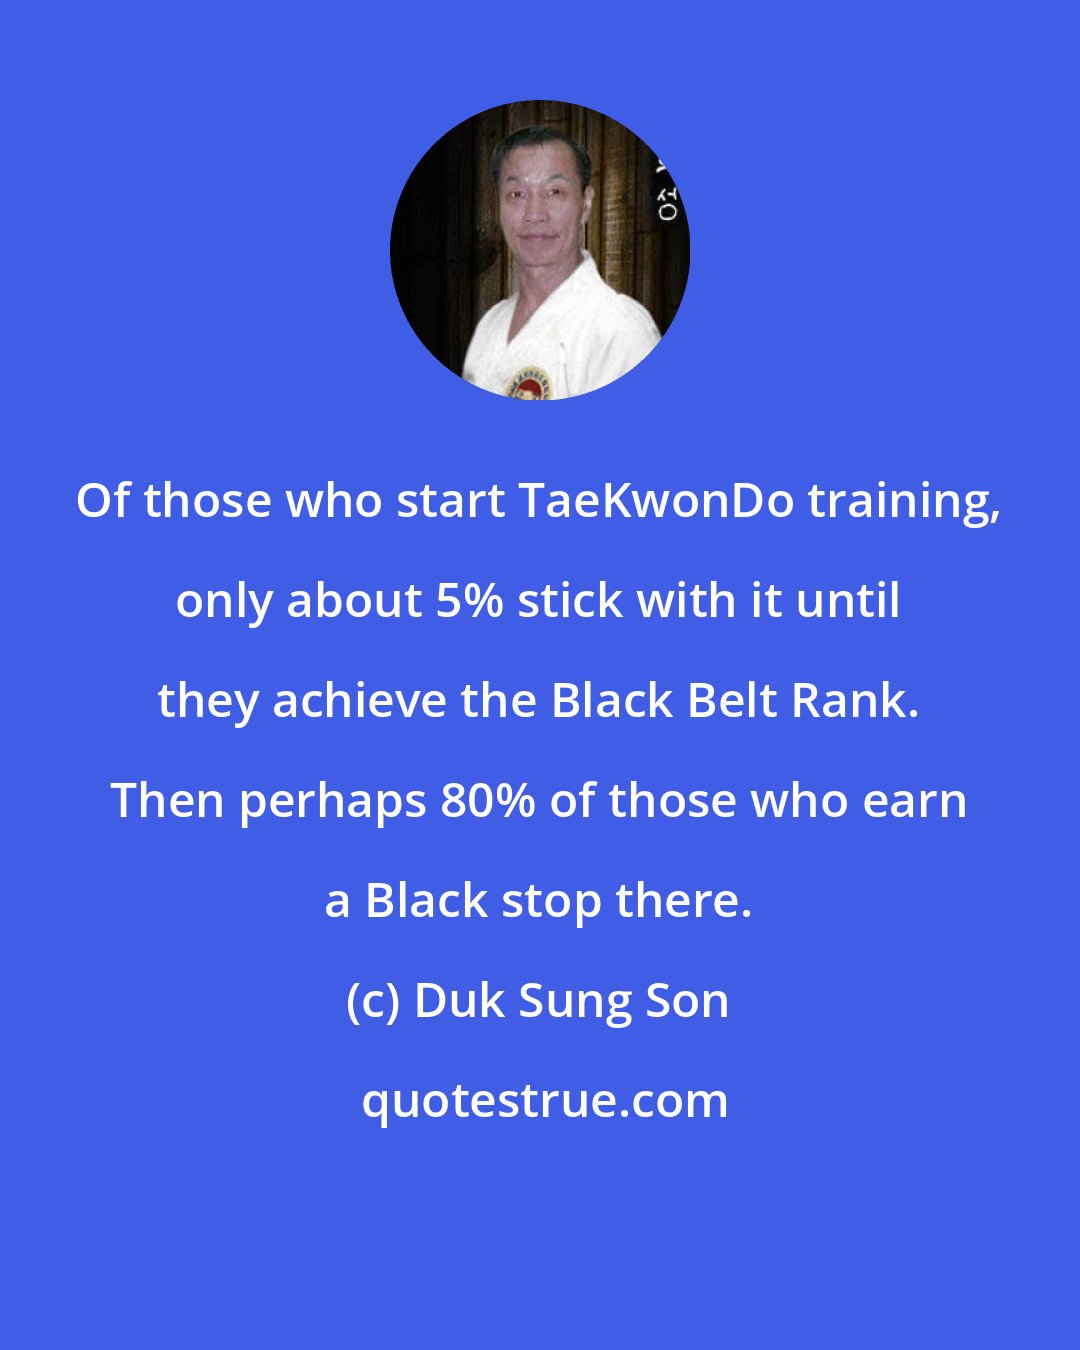 Duk Sung Son: Of those who start TaeKwonDo training, only about 5% stick with it until they achieve the Black Belt Rank. Then perhaps 80% of those who earn a Black stop there.